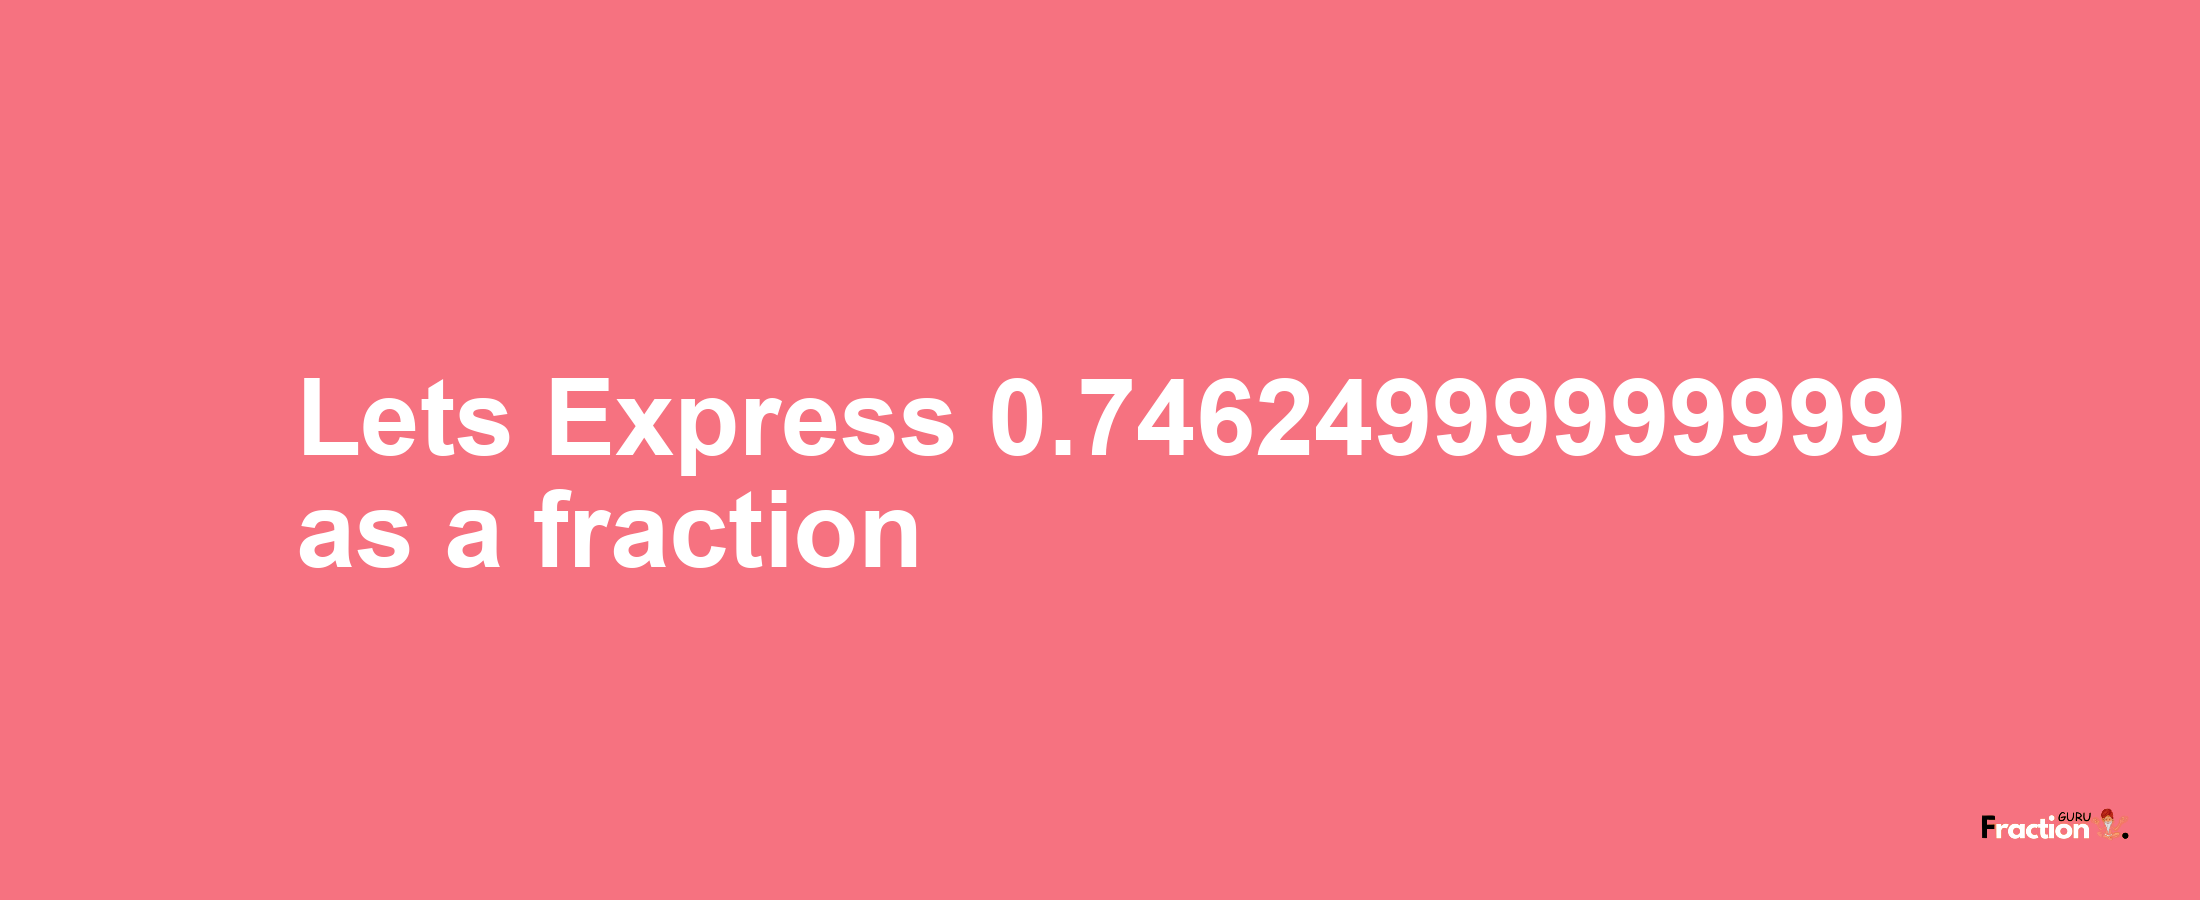 Lets Express 0.74624999999999 as afraction